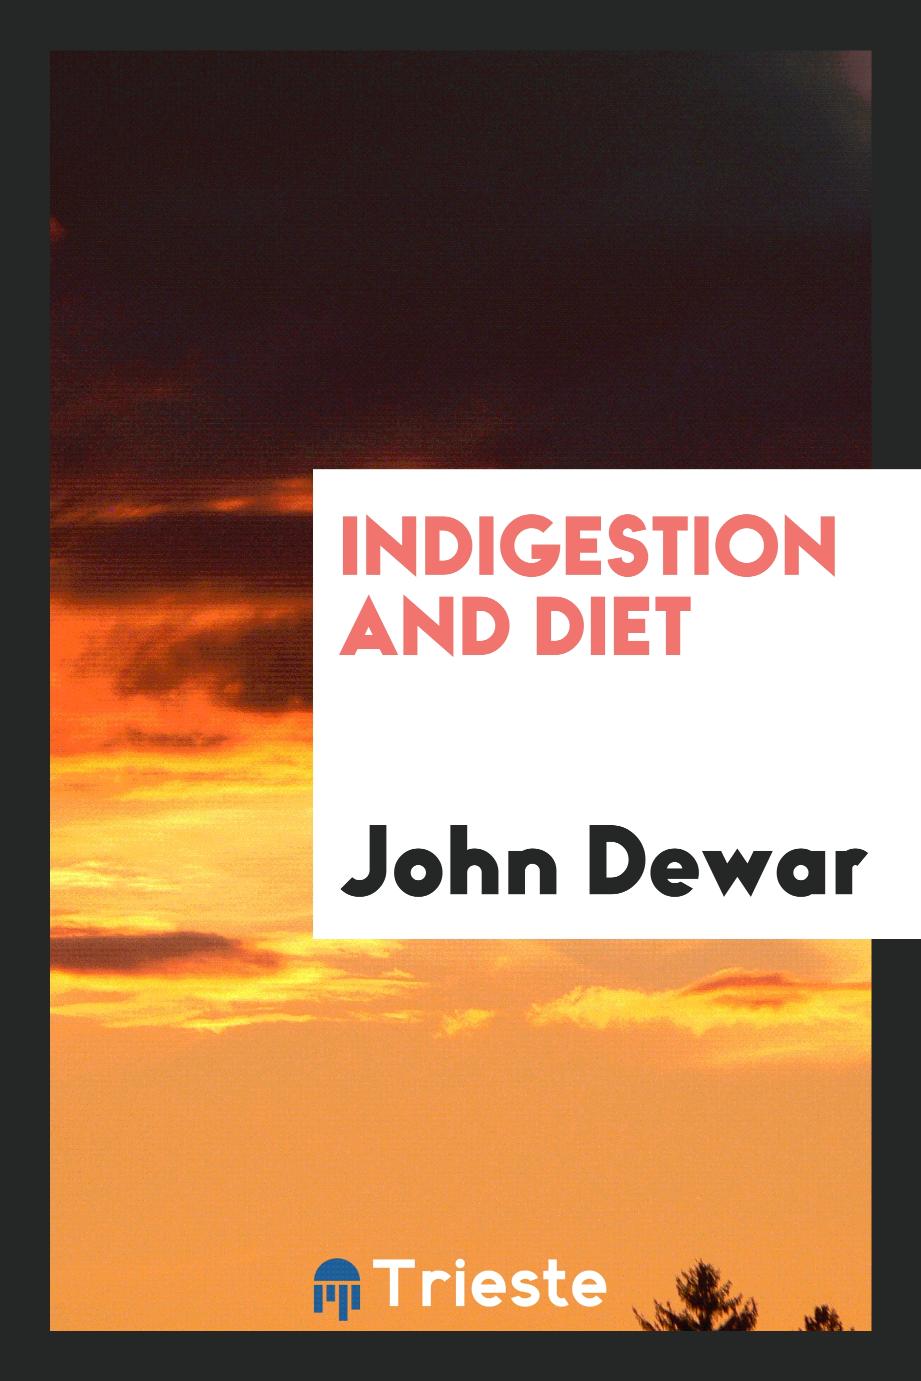 Indigestion and diet